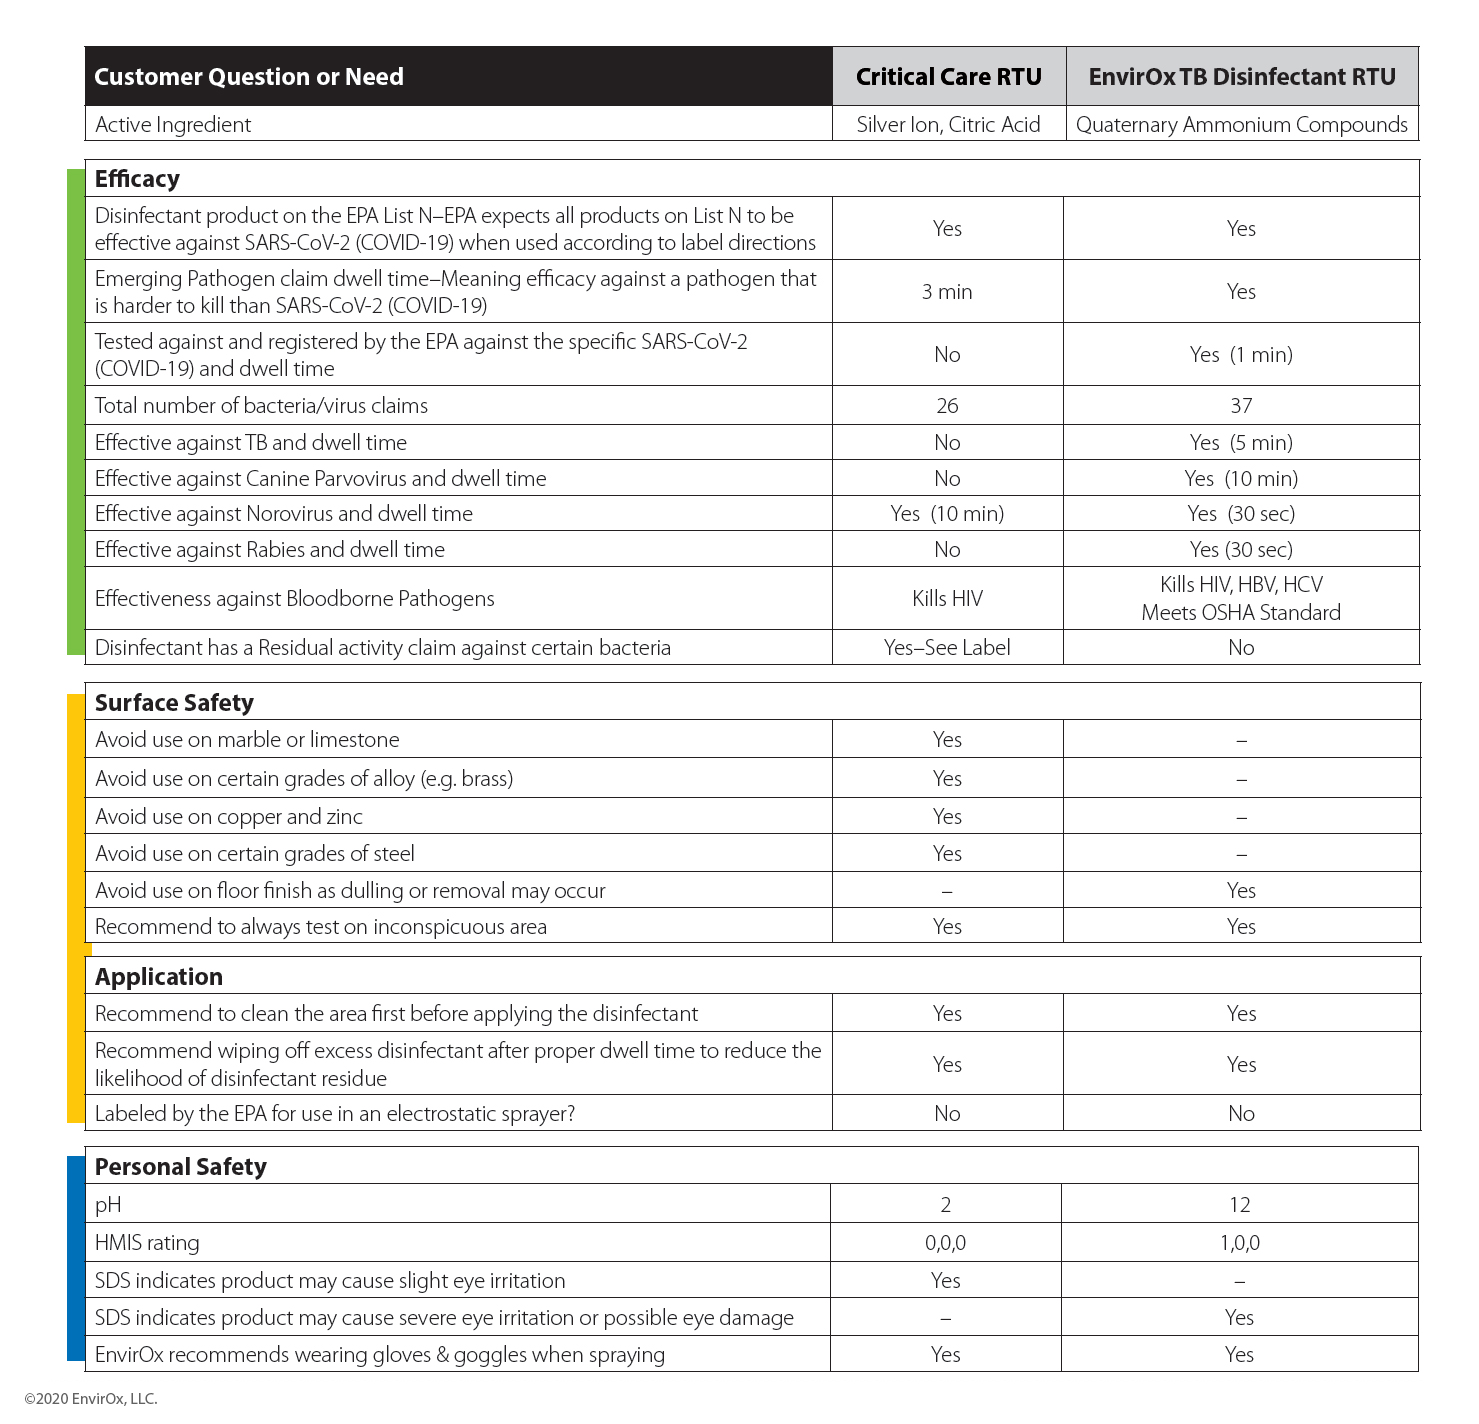 Choosing a Disinfectant - Chart between Critical Care and TB Disinfectant